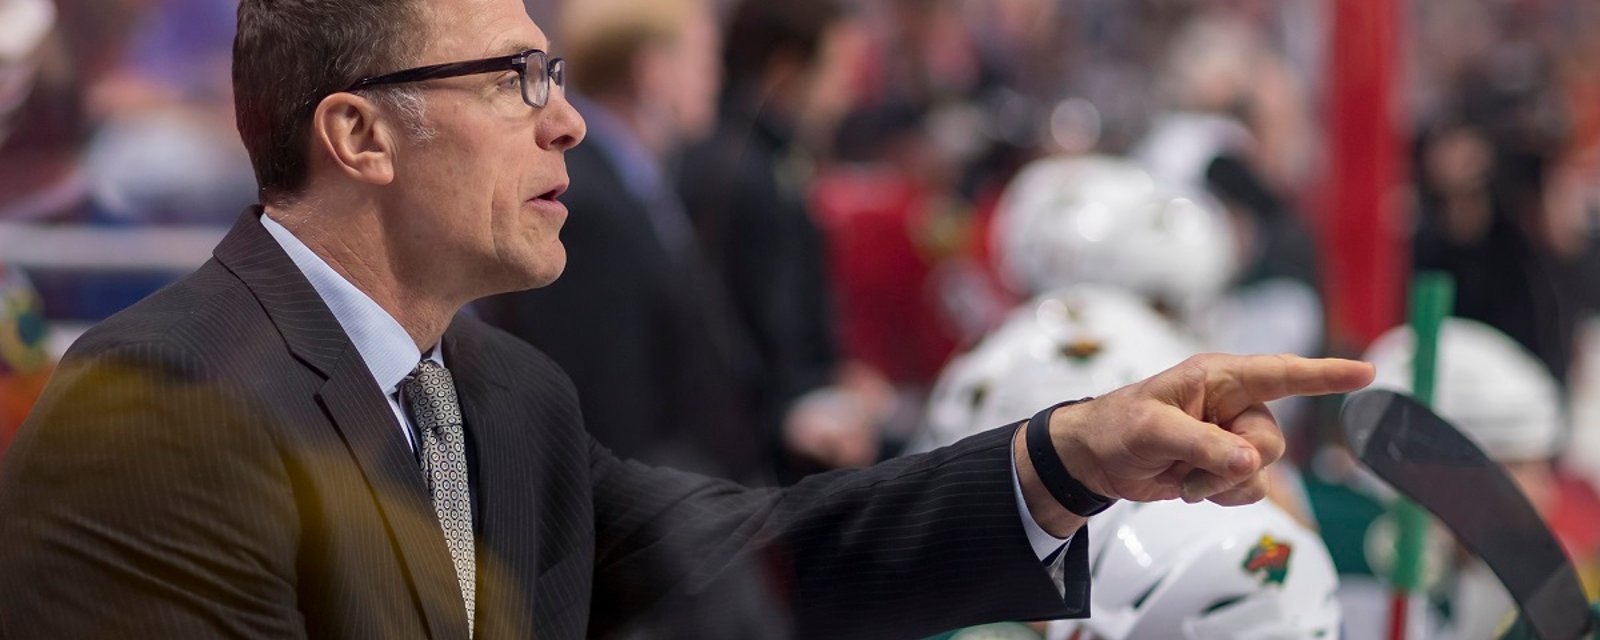 Breaking: Scott Stevens reveals where he is going after resigning as coach of the Wild!